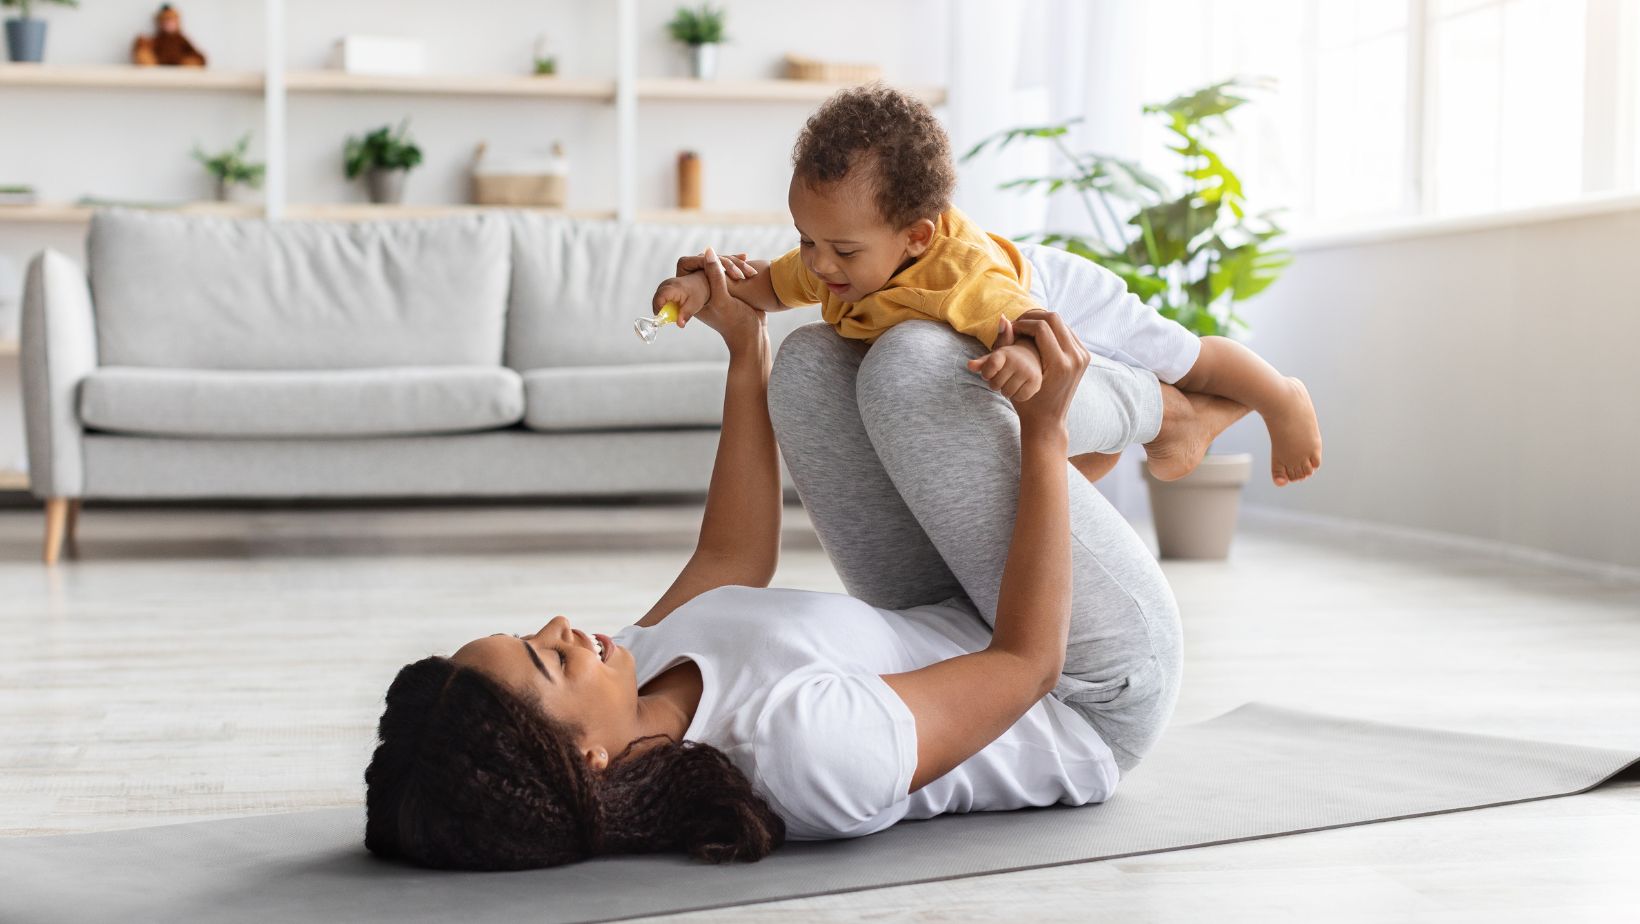 An Active Lifestyle for Mom and Baby: Benefits and Recommendations